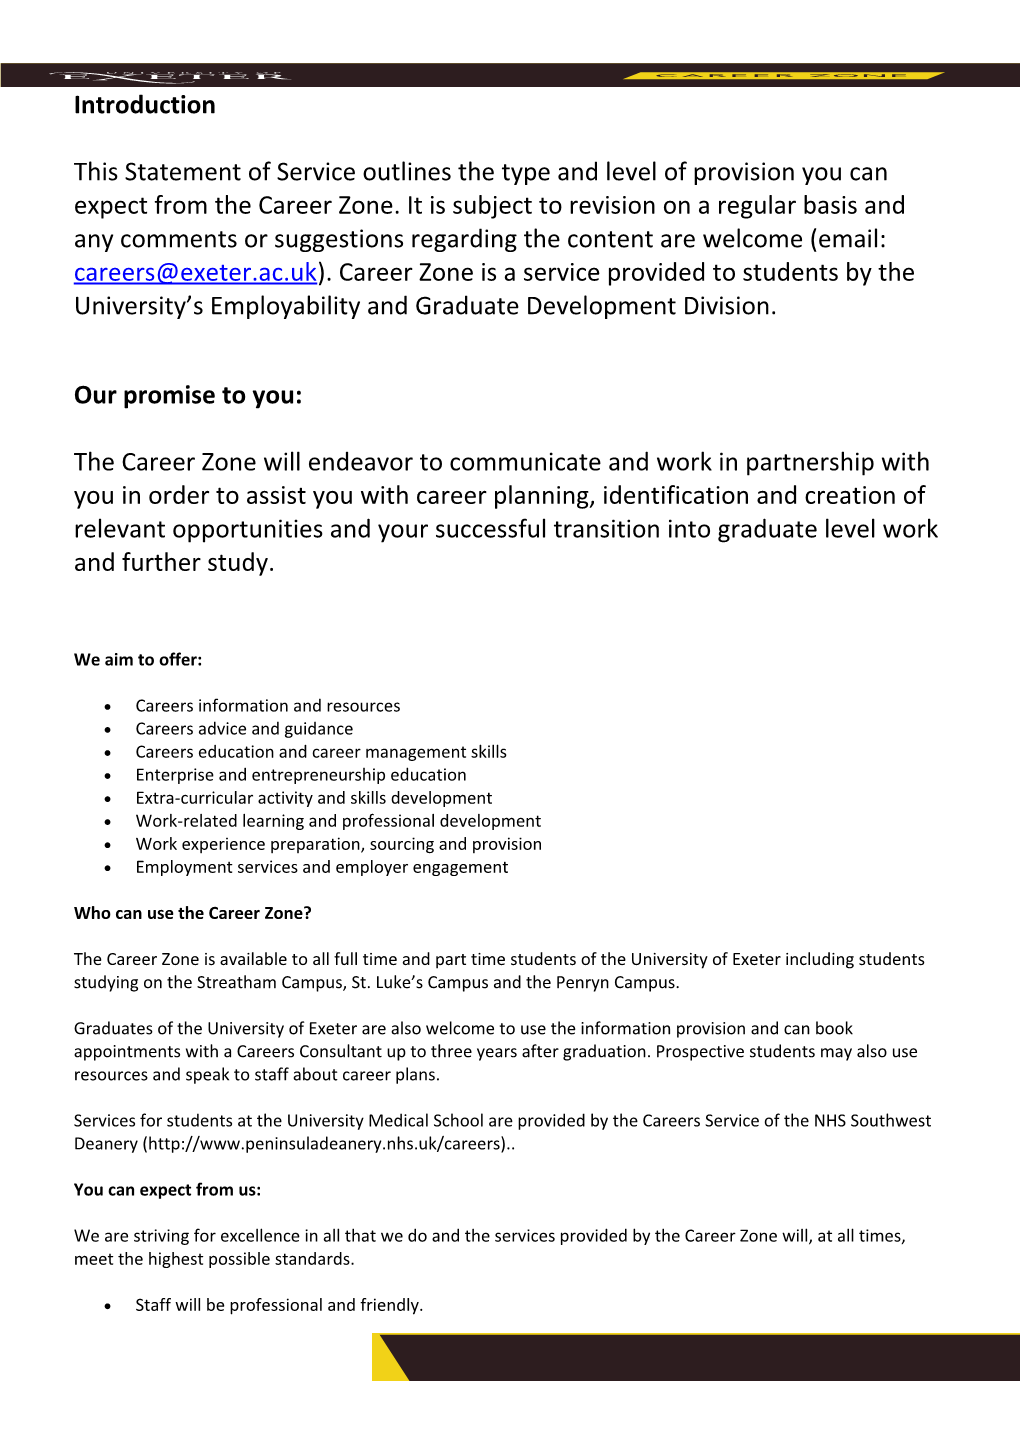 Career Zone Statement of Service